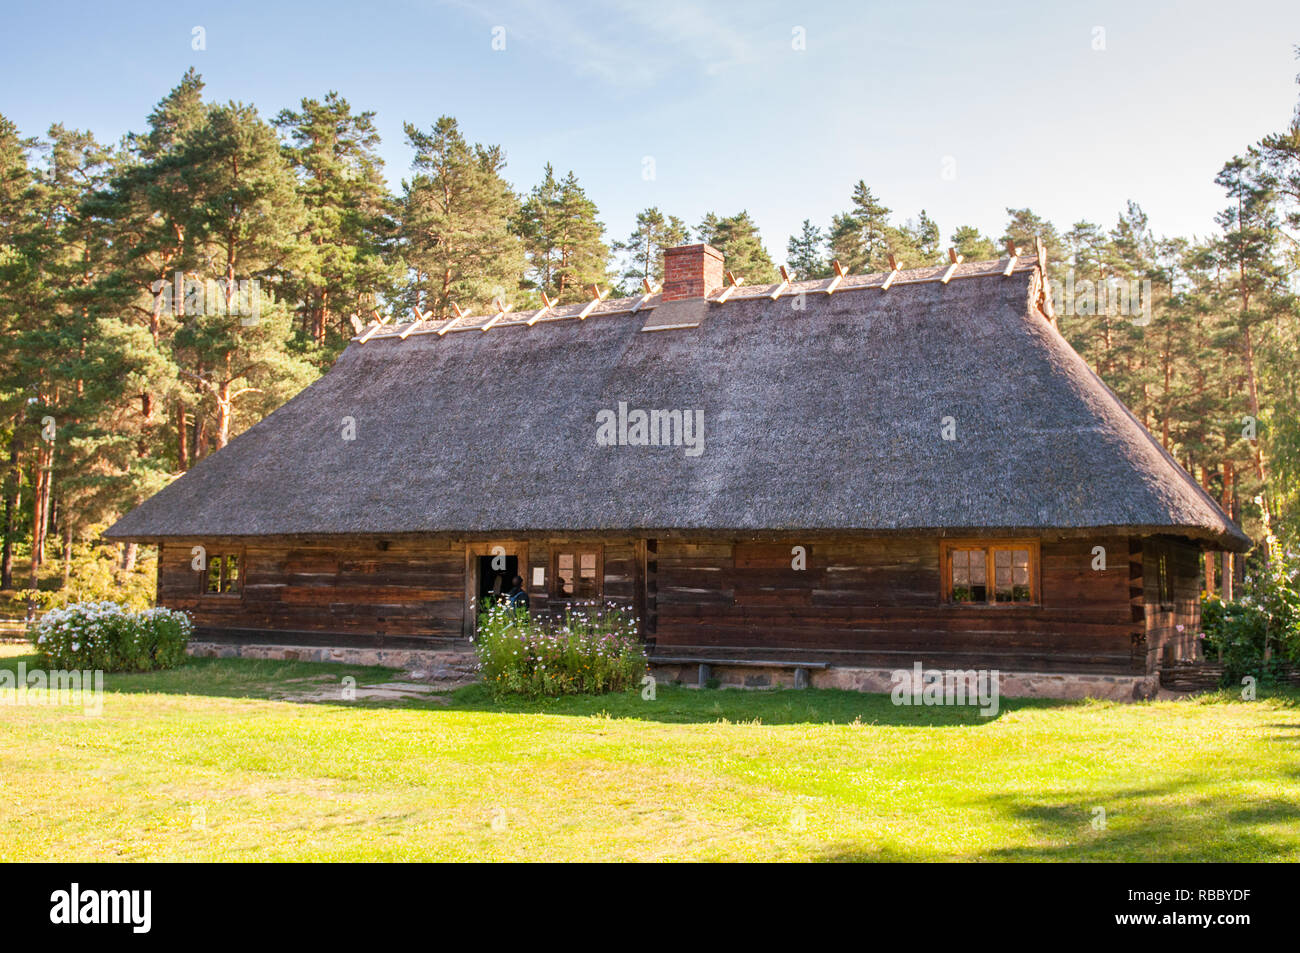 The ethnographic open air museum of Latvia. Summer day. Stock Photo